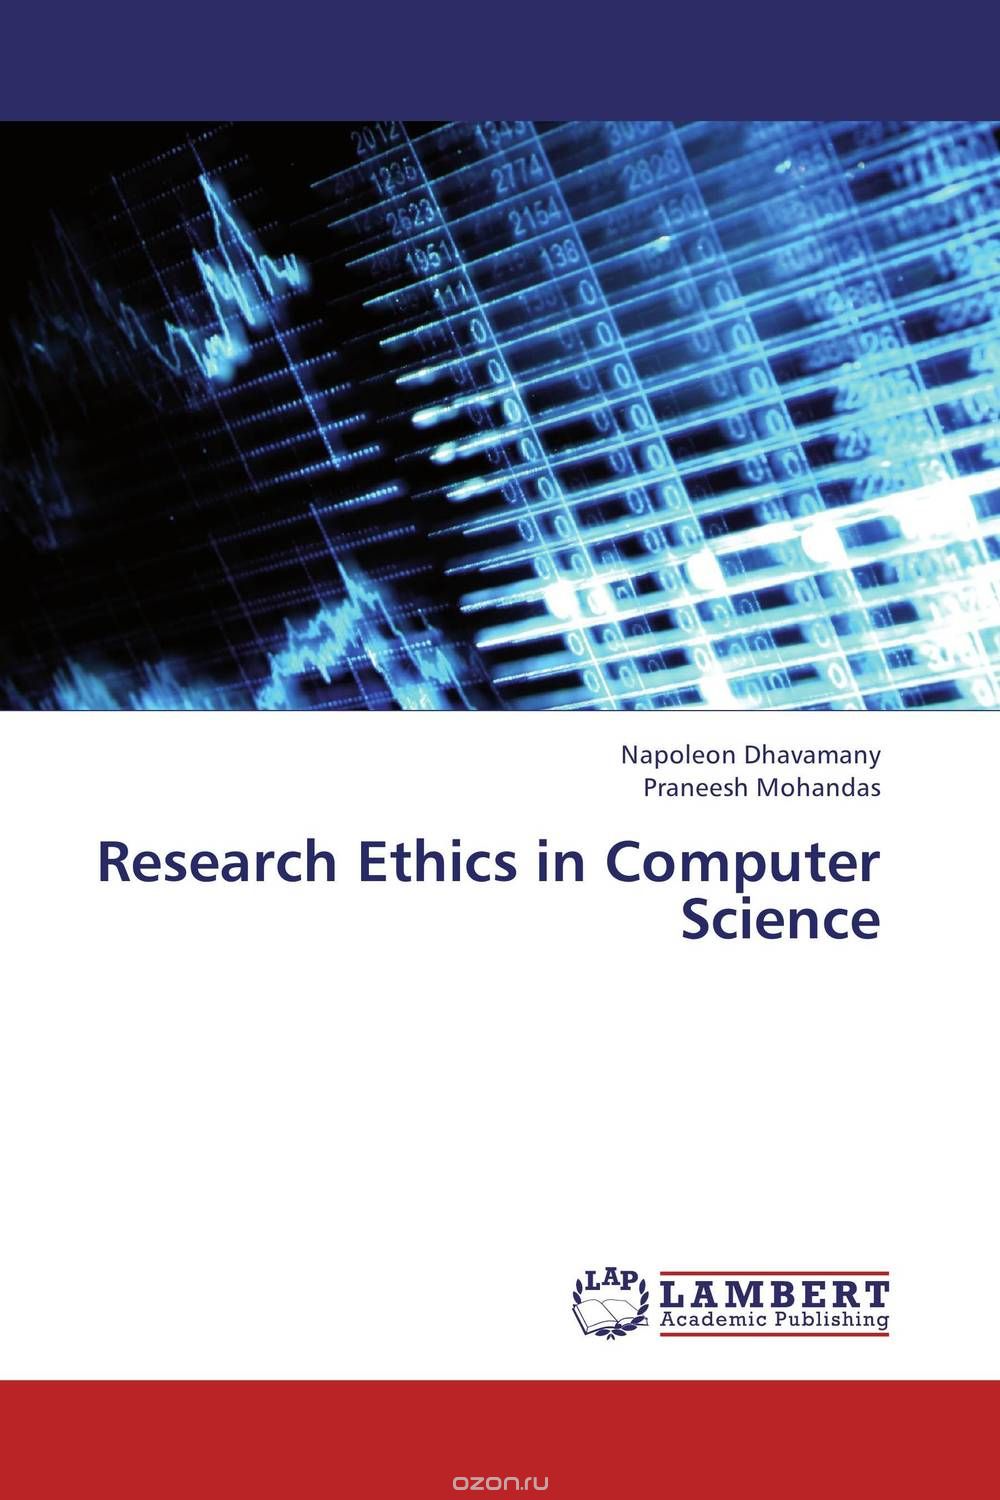 Research Ethics in Computer Science